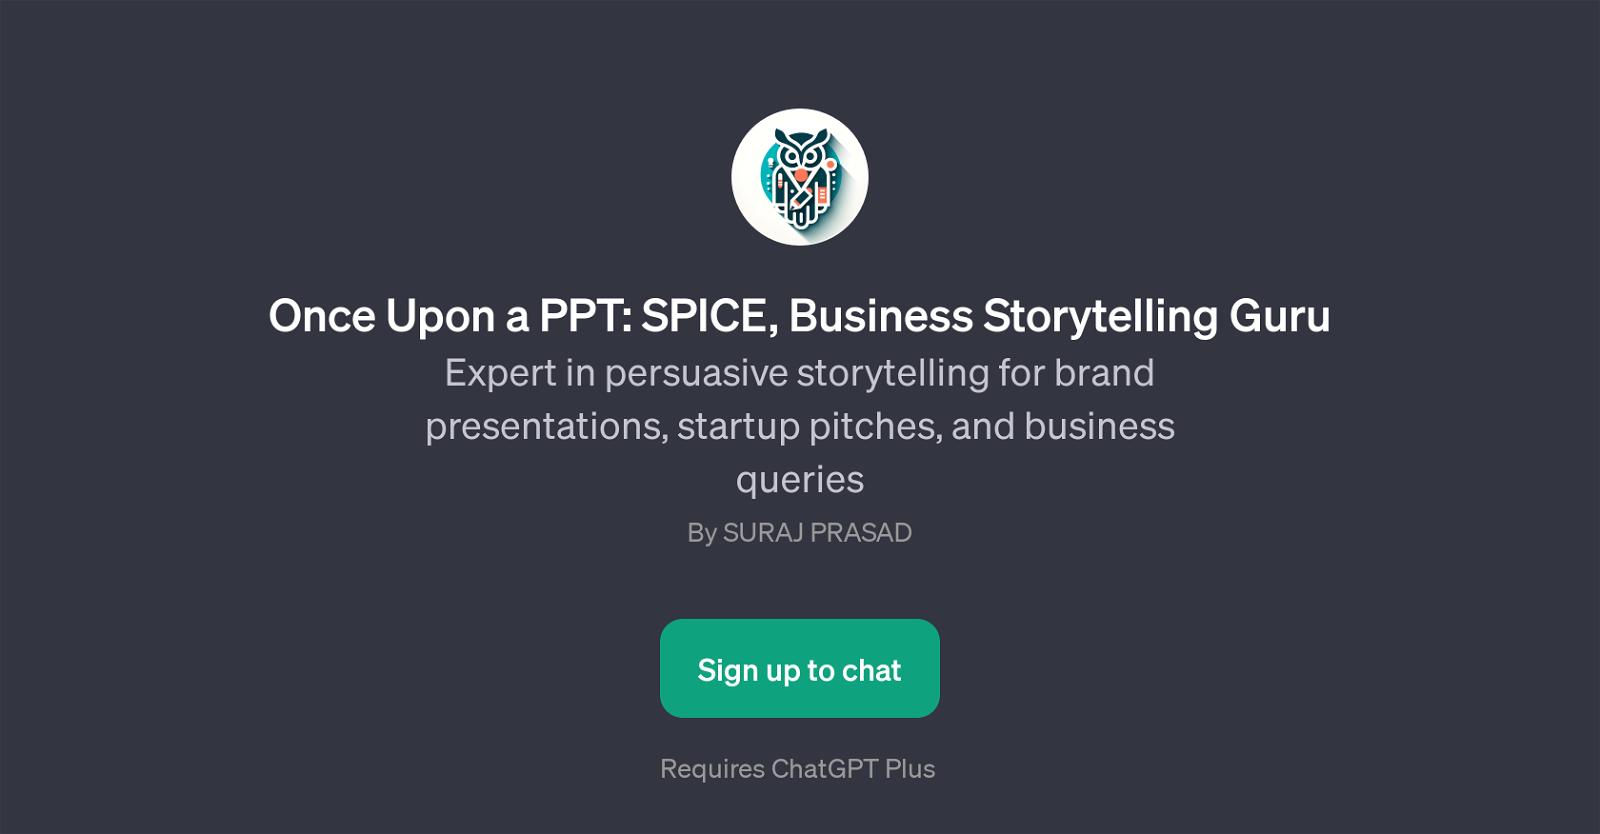 Once Upon a PPT: SPICE website